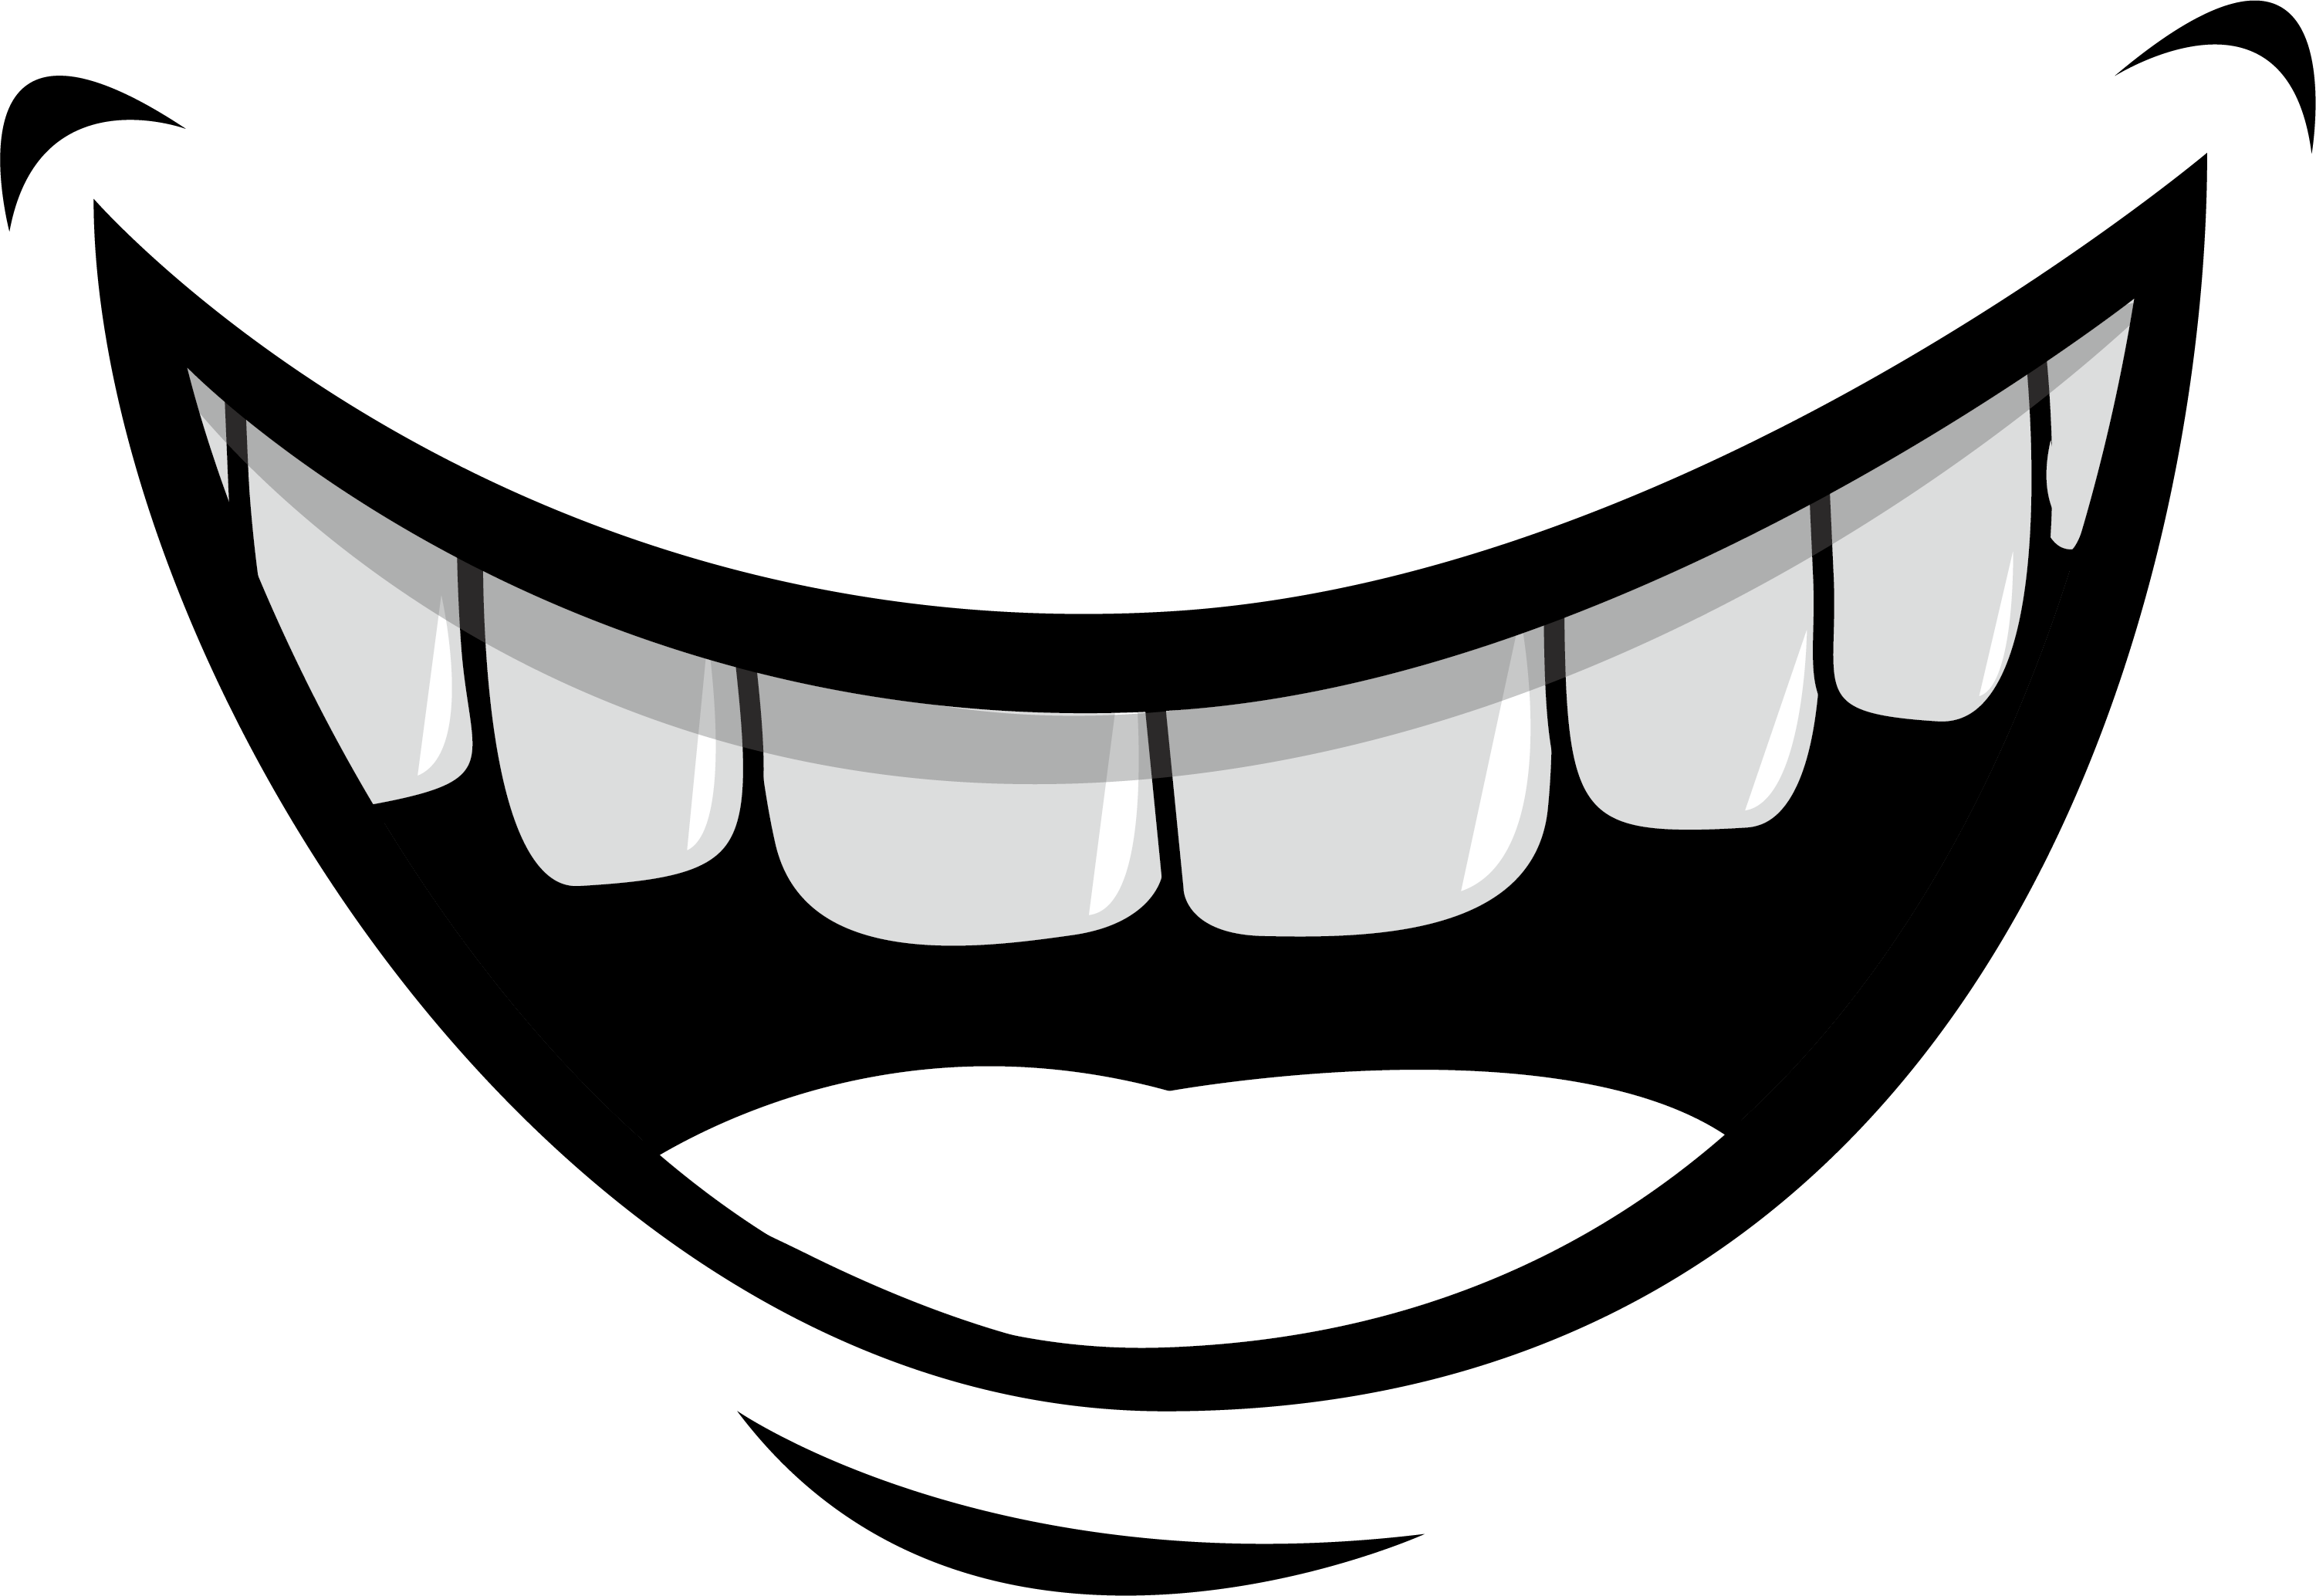 Clipart mouth mouth expression. Lip tooth illustration creative